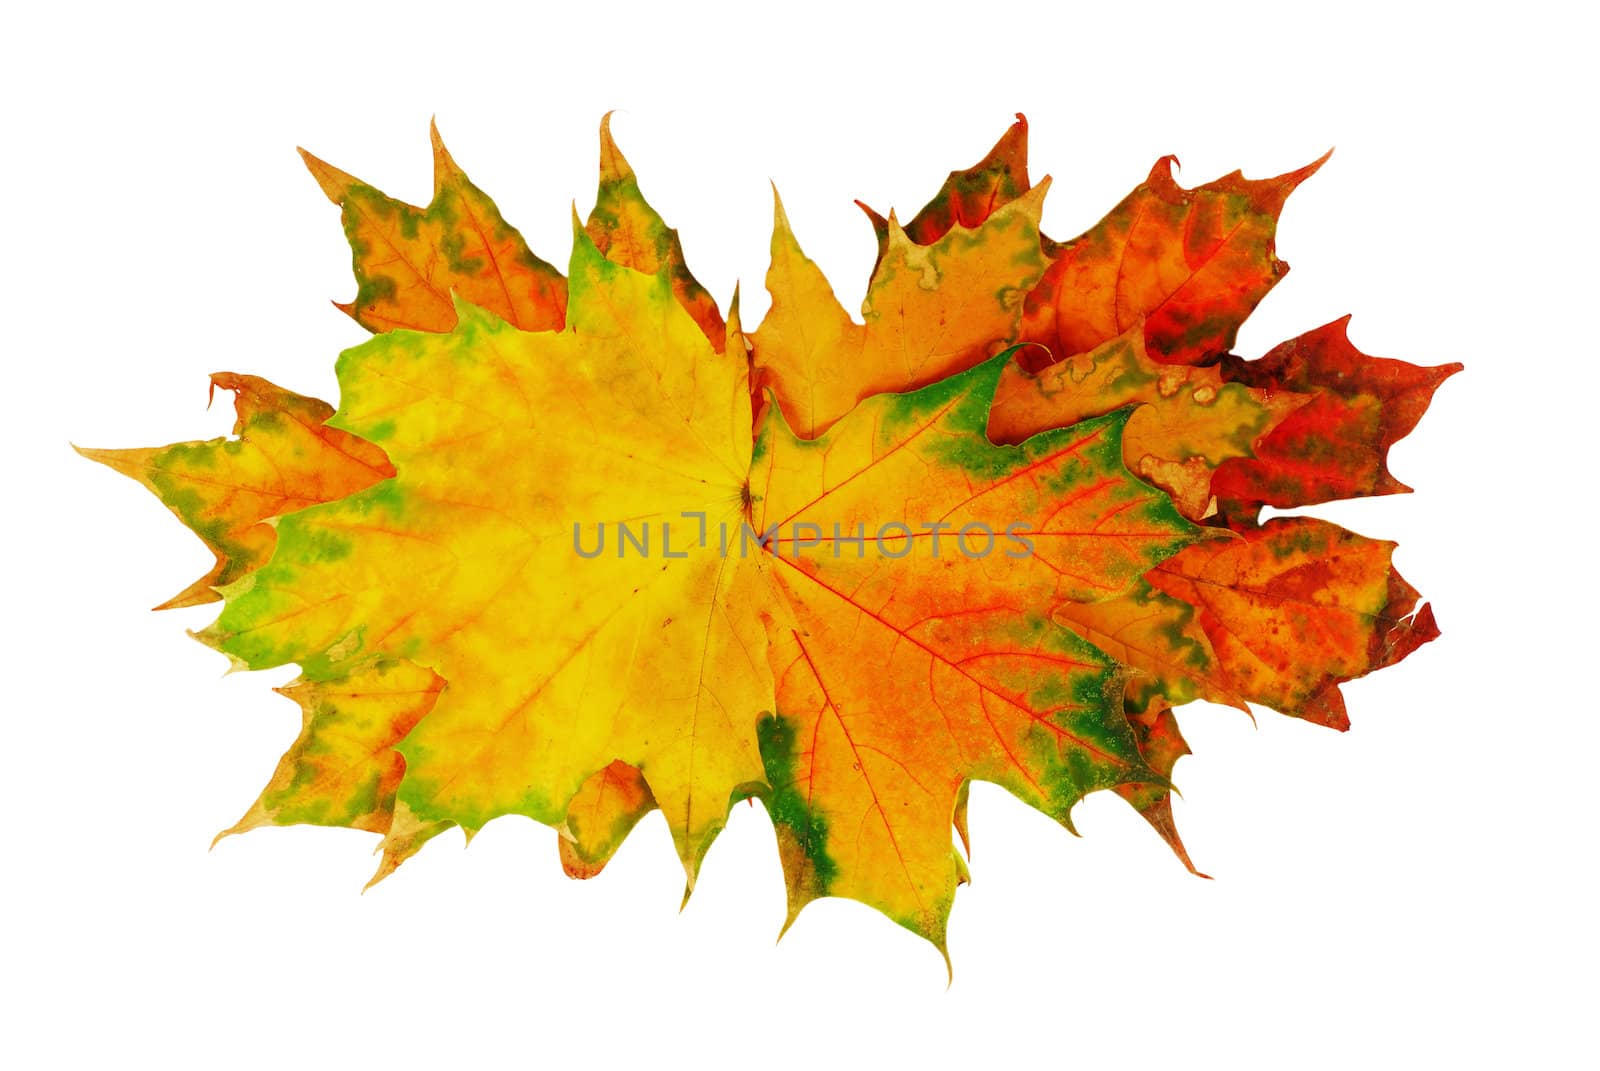 Autumn maple leaves by simply